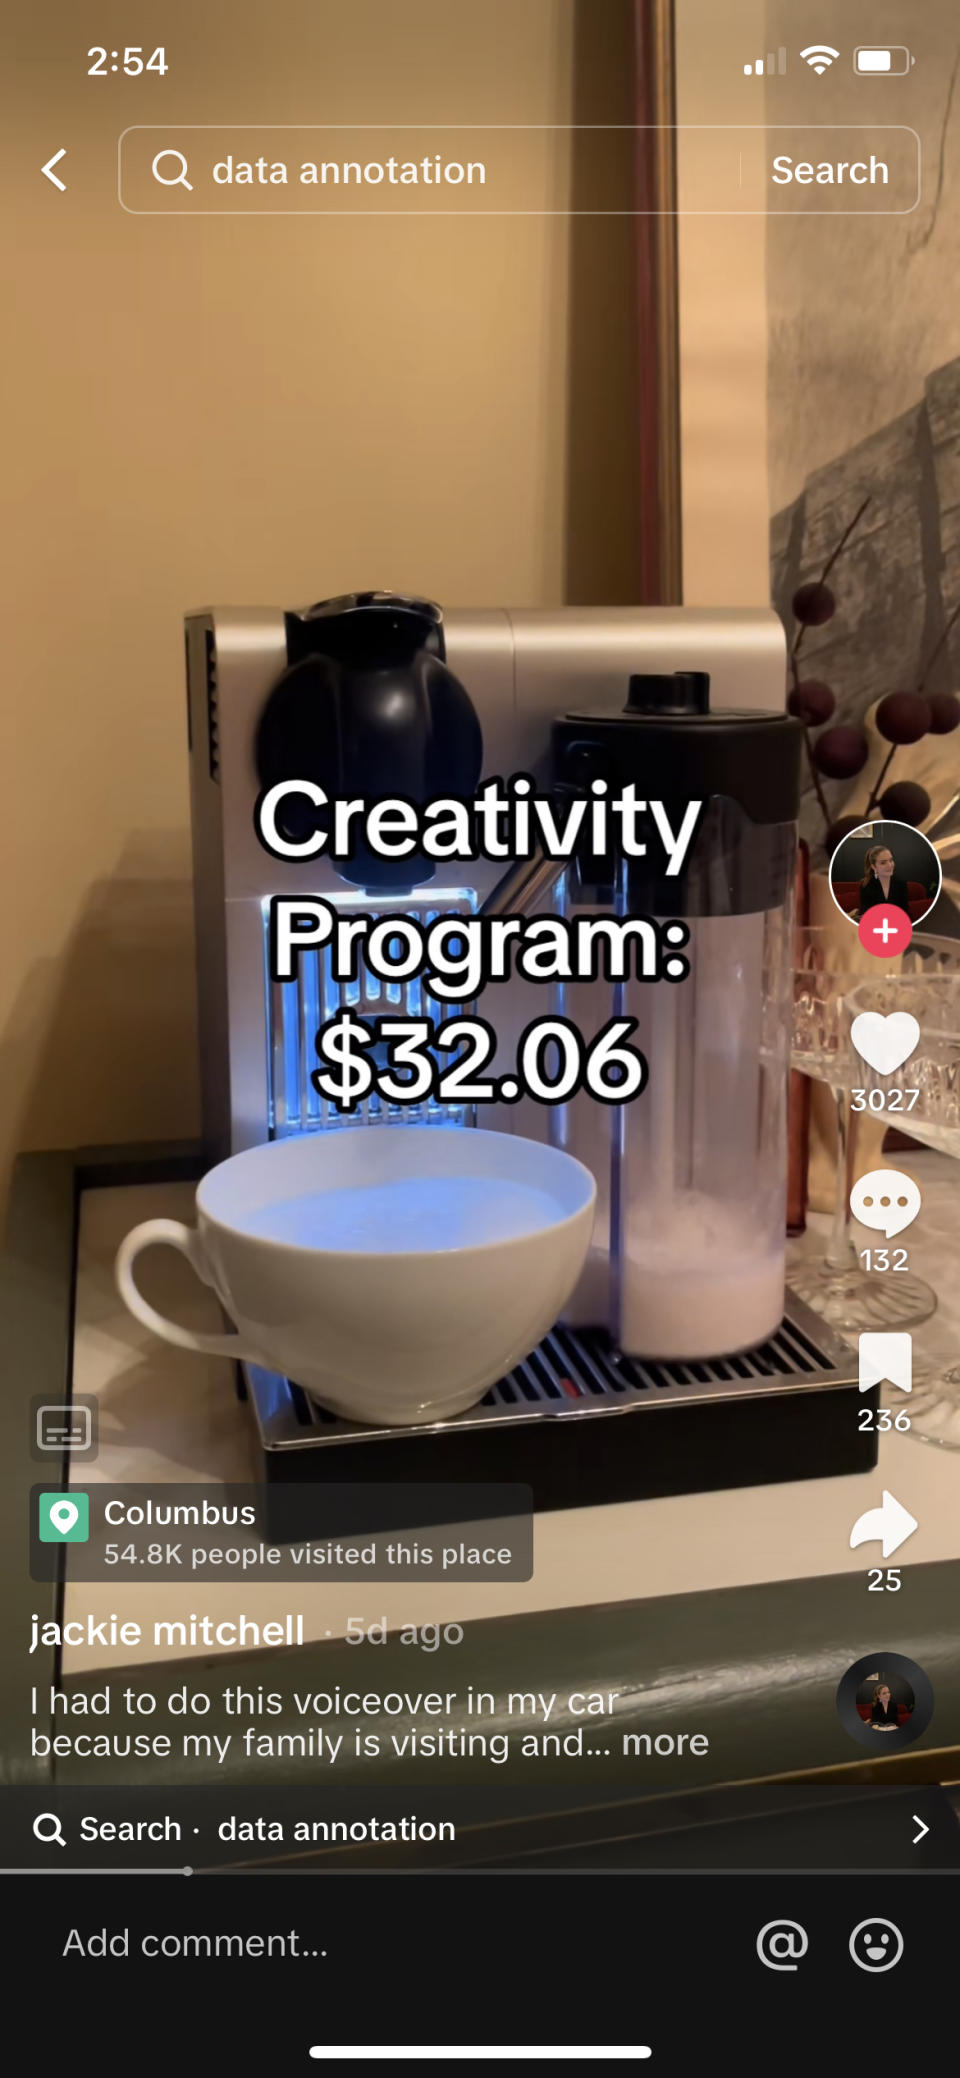 Jackie's earnings of $32.06 from TikTok on Day 16